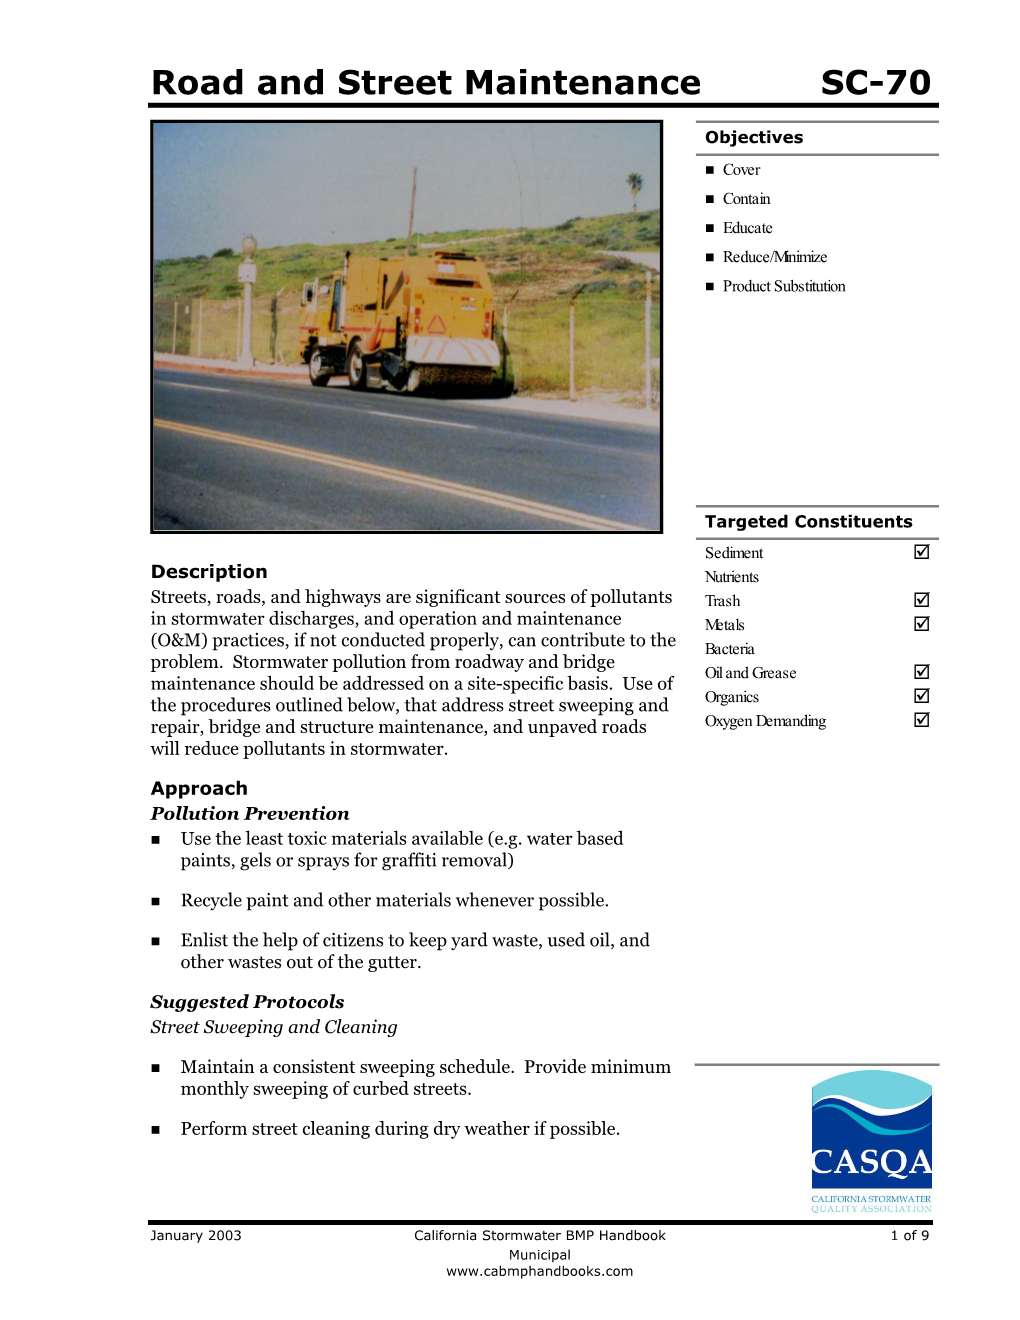 SC-70 Road and Street Maintenance